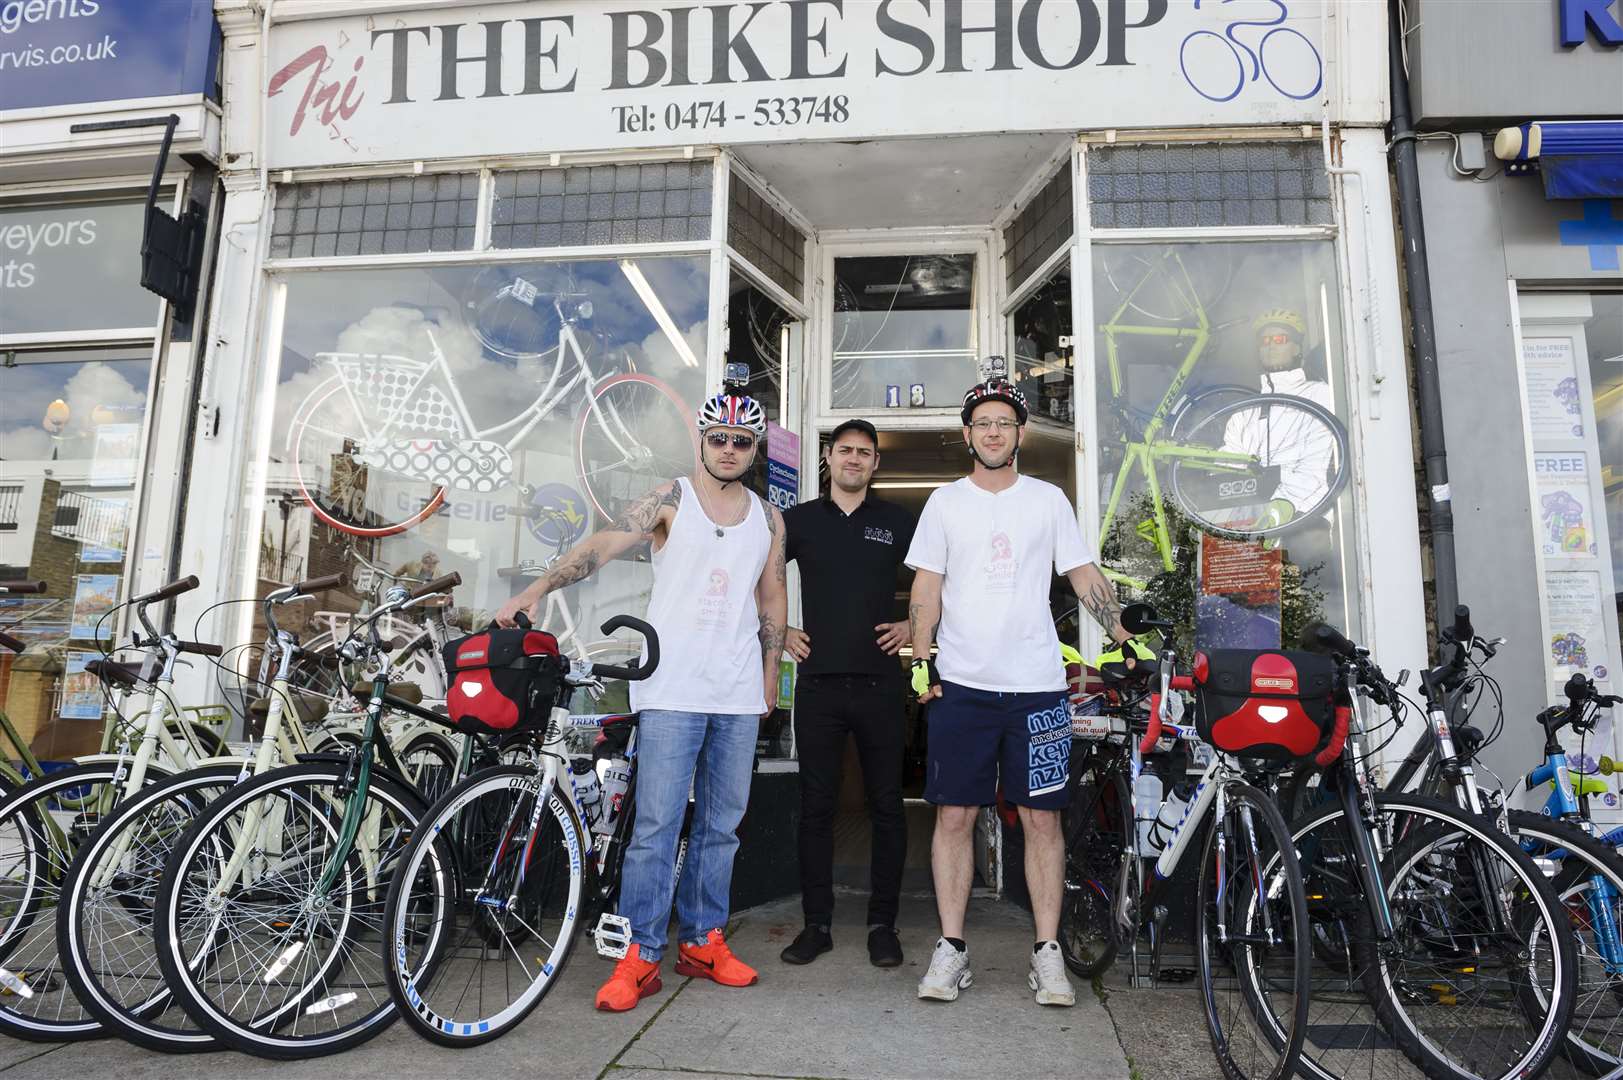 From left, Jay Pritchard, Leo Brown from Tri The Bike Shop, and Dennis Woodgate.